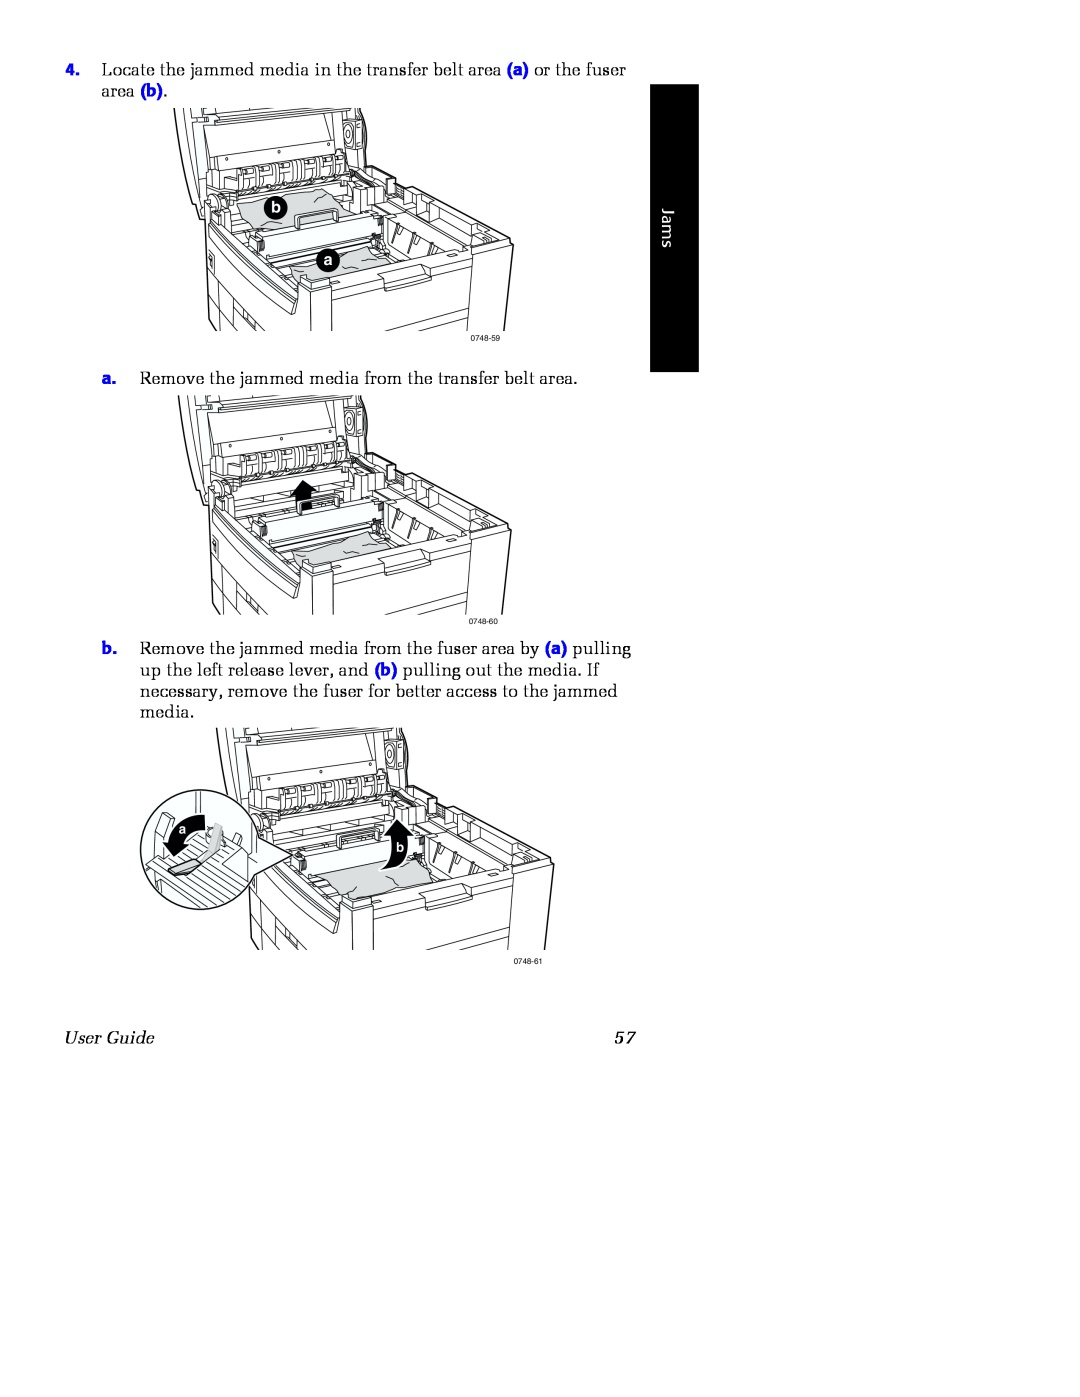 Xerox Phaser 2135 manual a. Remove the jammed media from the transfer belt area, Jams, User Guide 